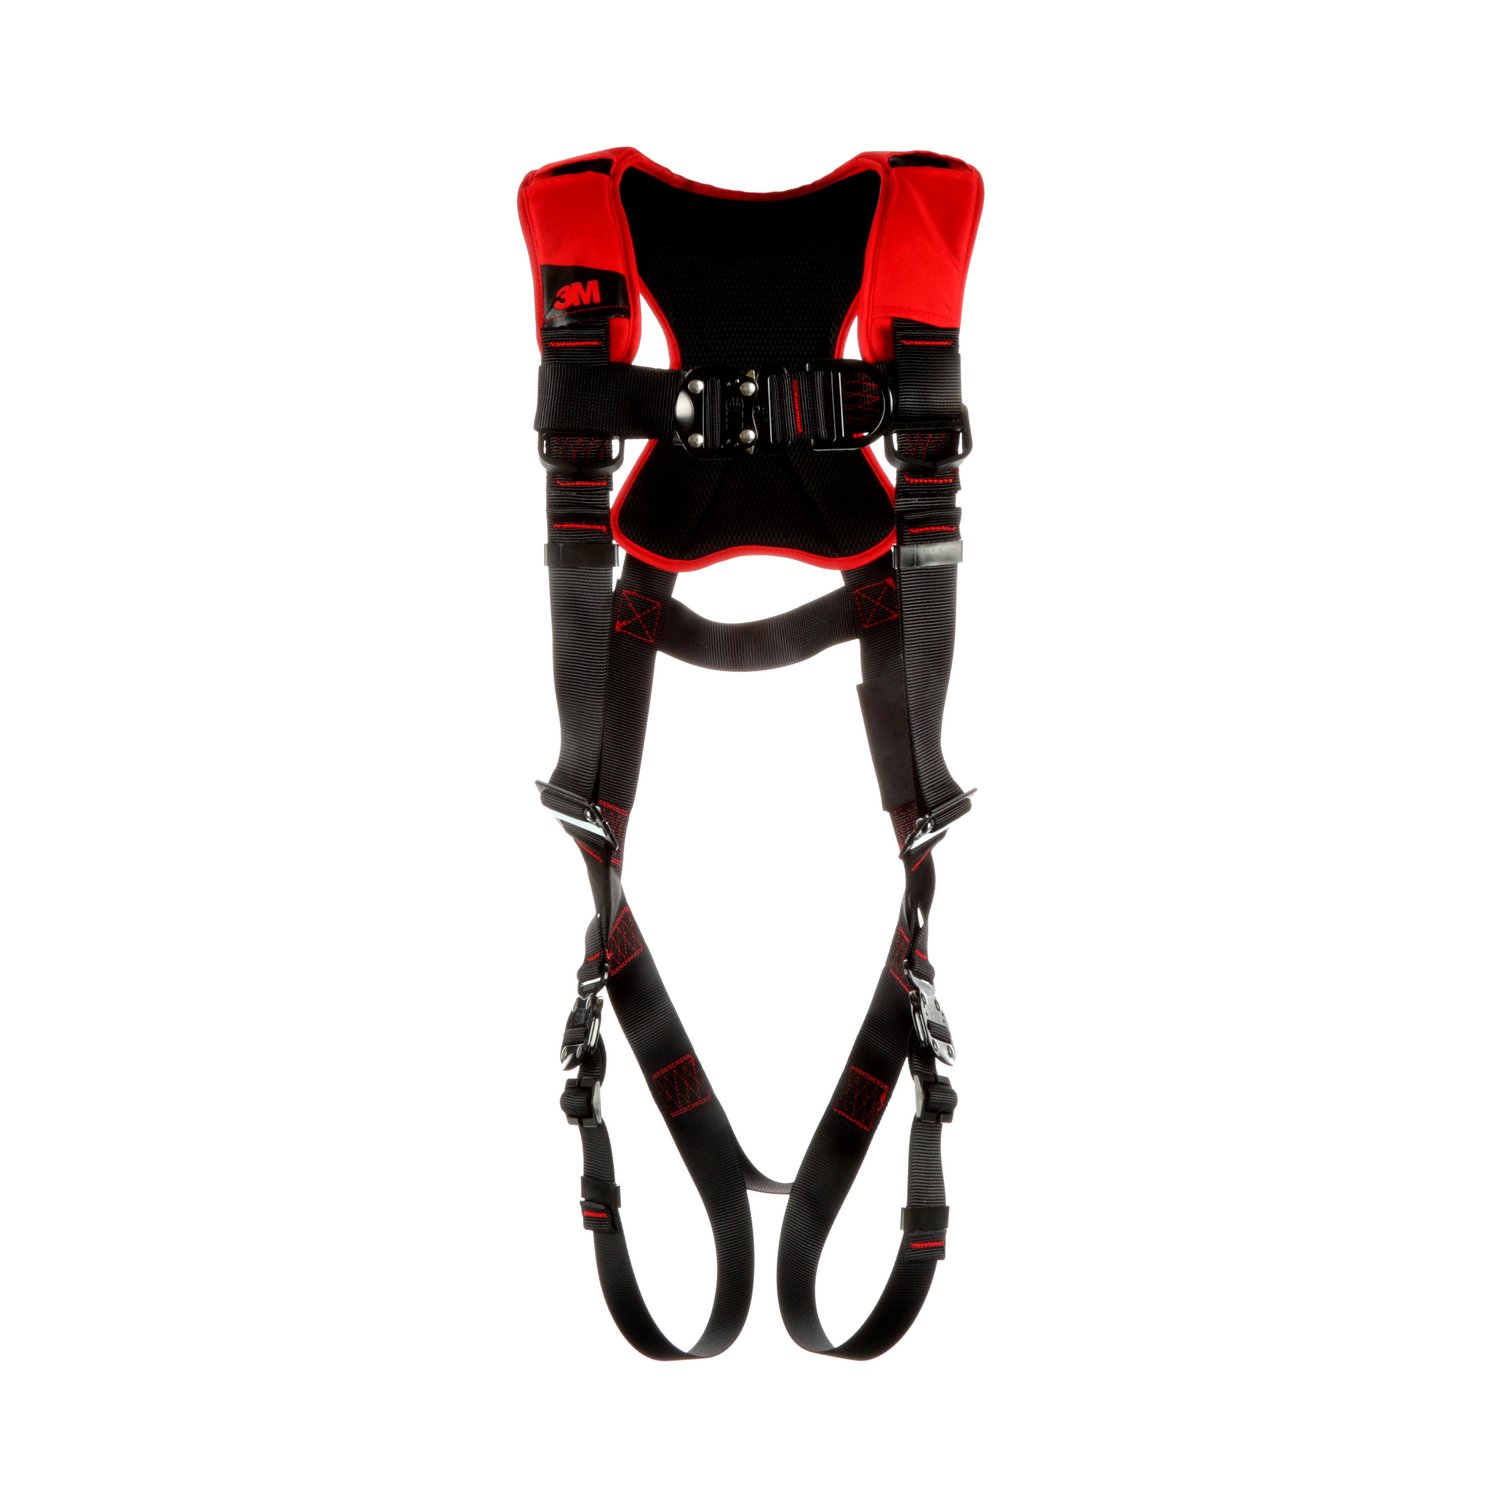 7012816671 - 3M Protecta P200 Comfort Vest Climbing Safety Harness 1161404, Small